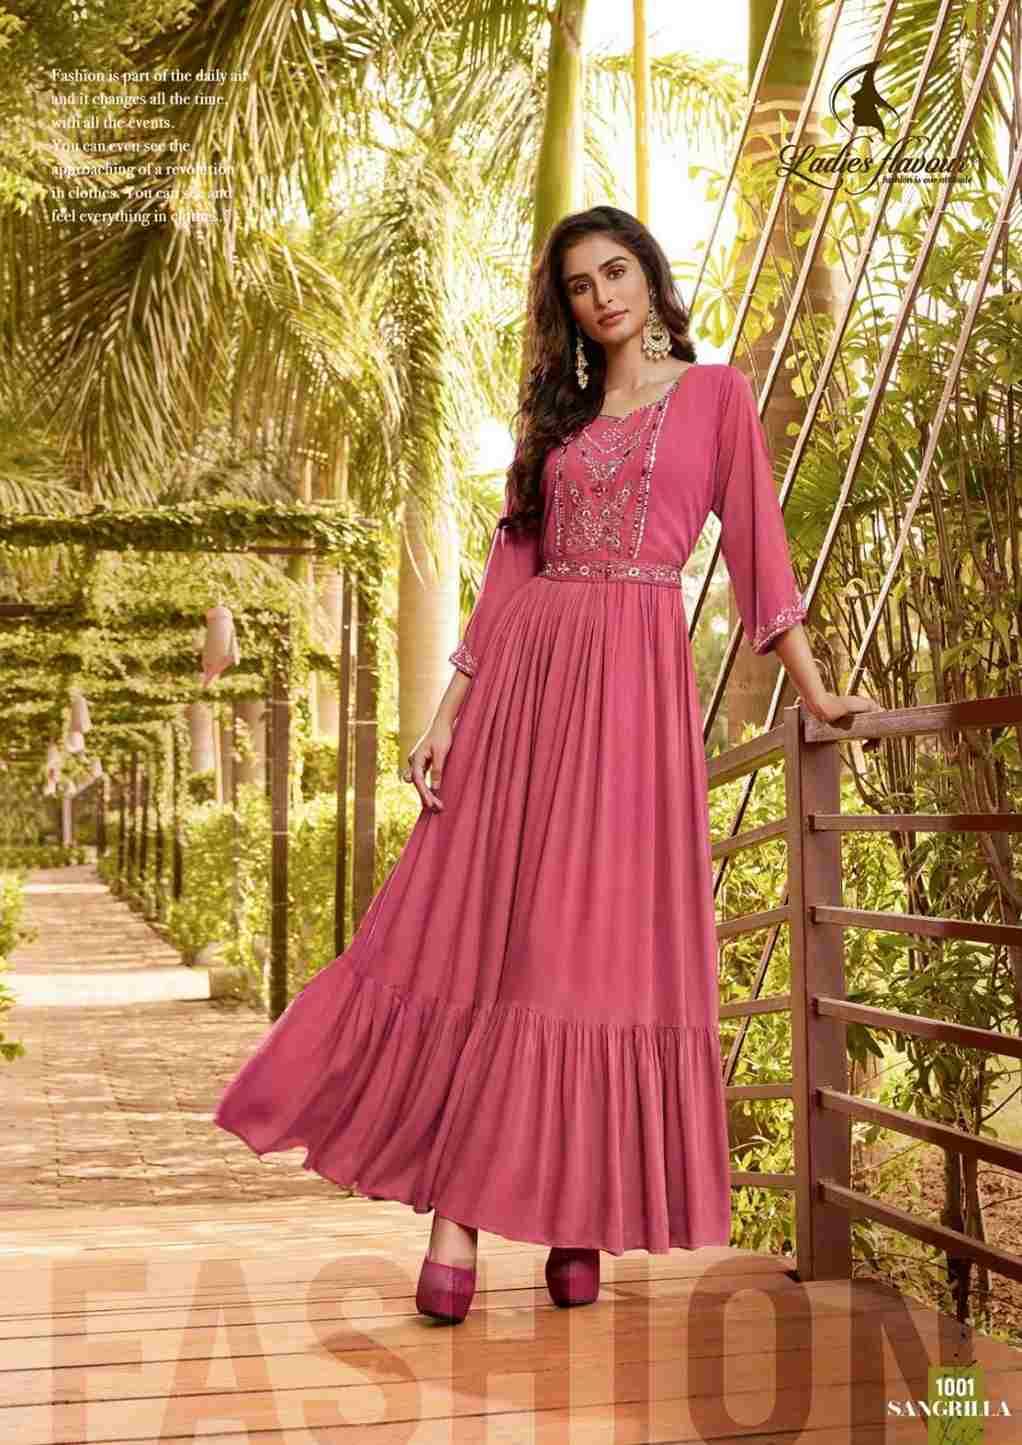 Sangrilla By Ladies Flavour 1001 To 1004 Series Designer Stylish Fancy Colorful Beautiful Party Wear & Ethnic Wear Collection Premium Rayon Gowns At Wholesale Price